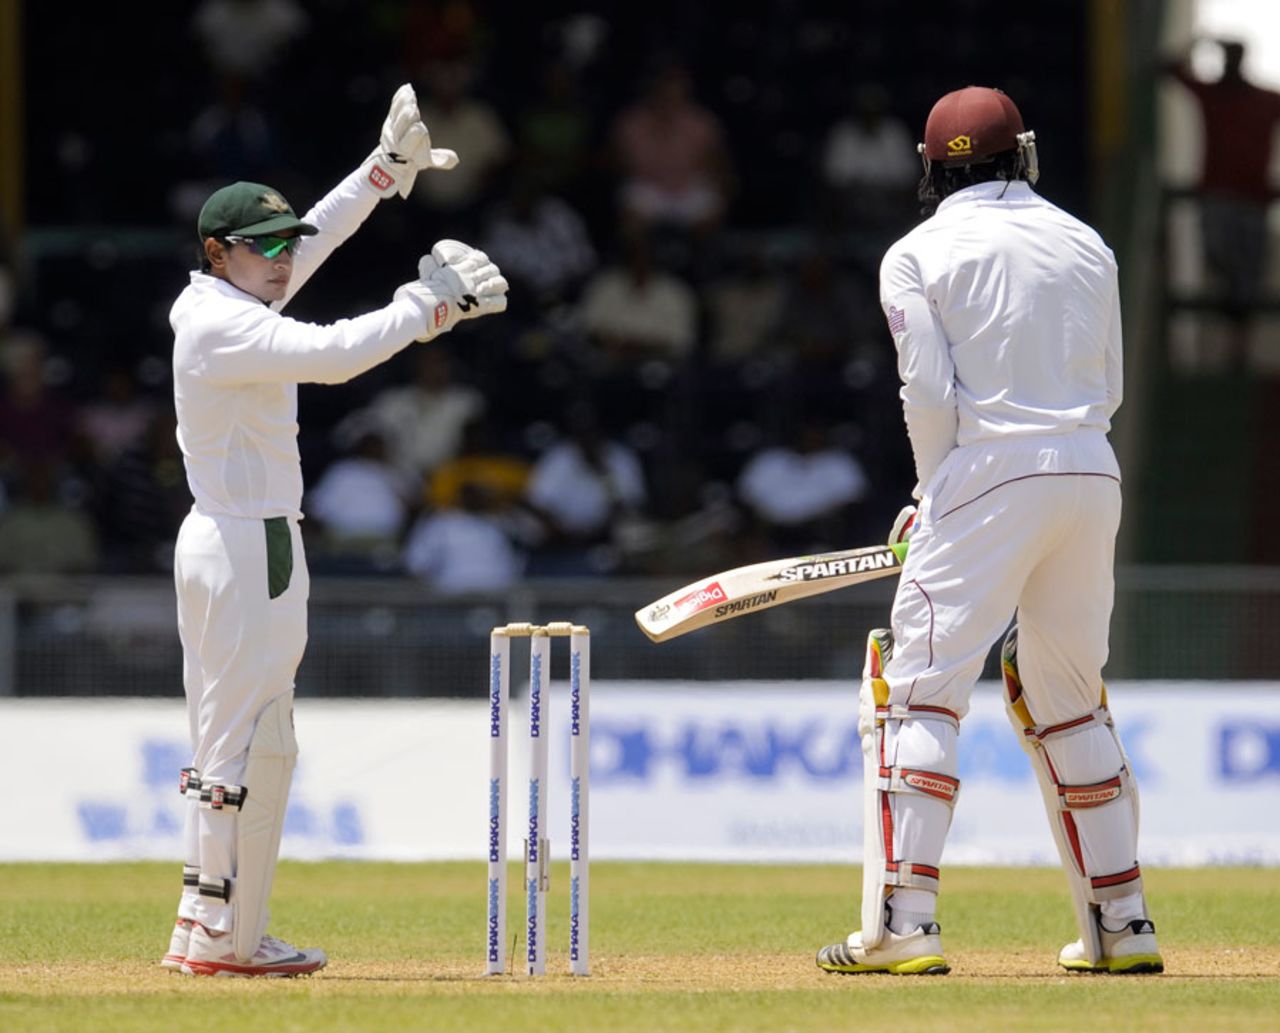 Mushfiqur Rahim takes his time to set the field, West Indies v Bangladesh, 1st Test, St Vincent, 1st day, September 5, 2014